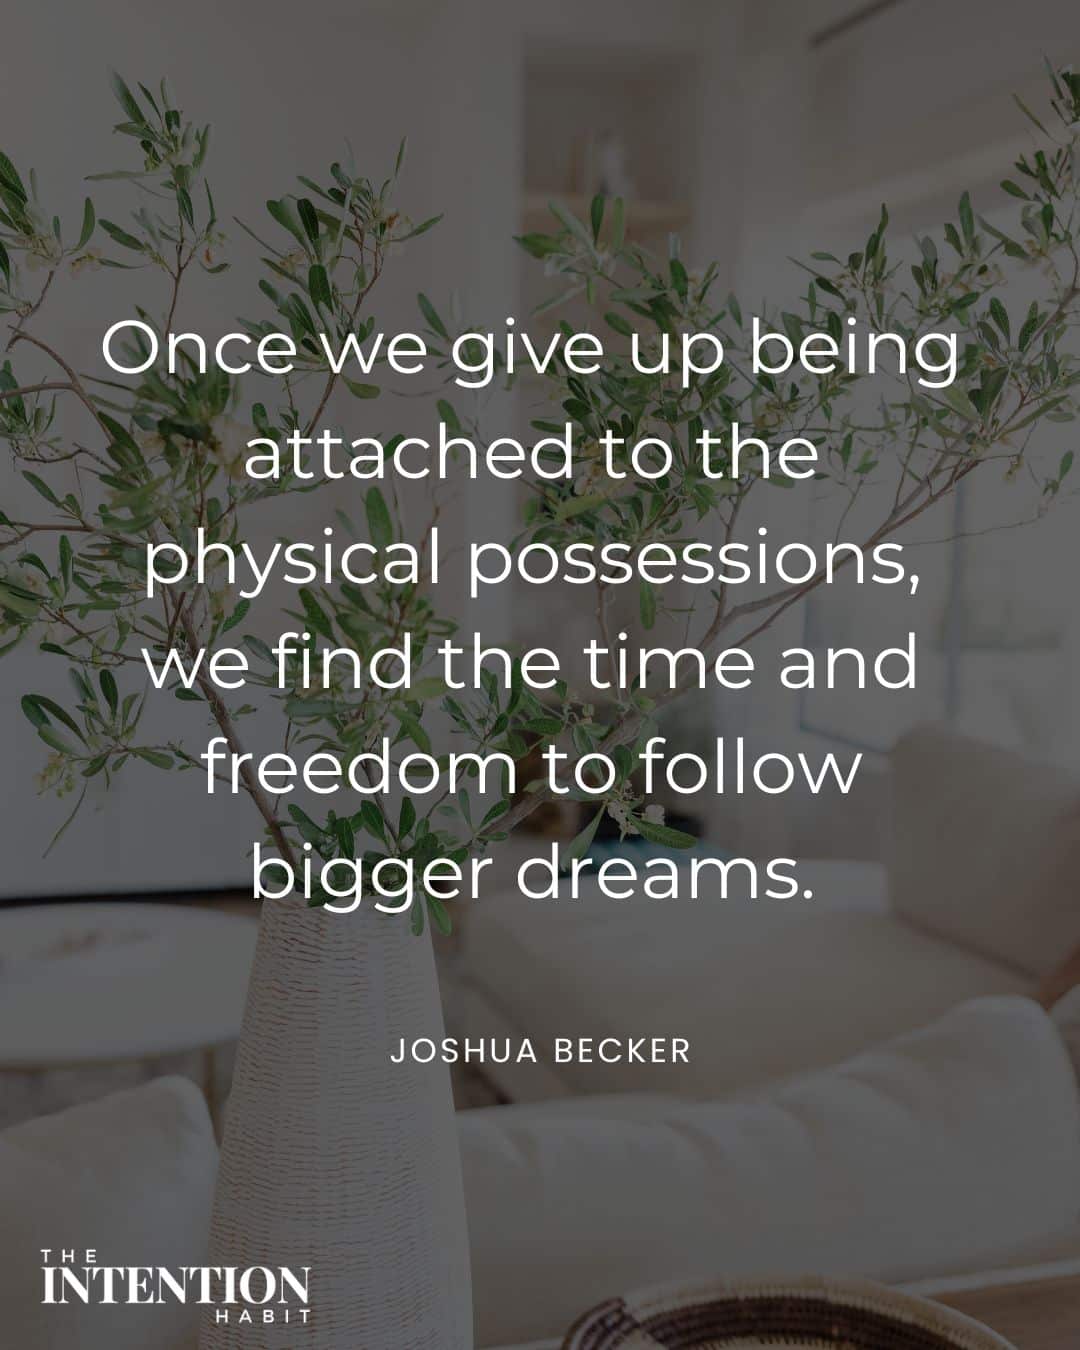 once we give up being attached to the physical possessions, we find the time and freedom to follow bigger dreams